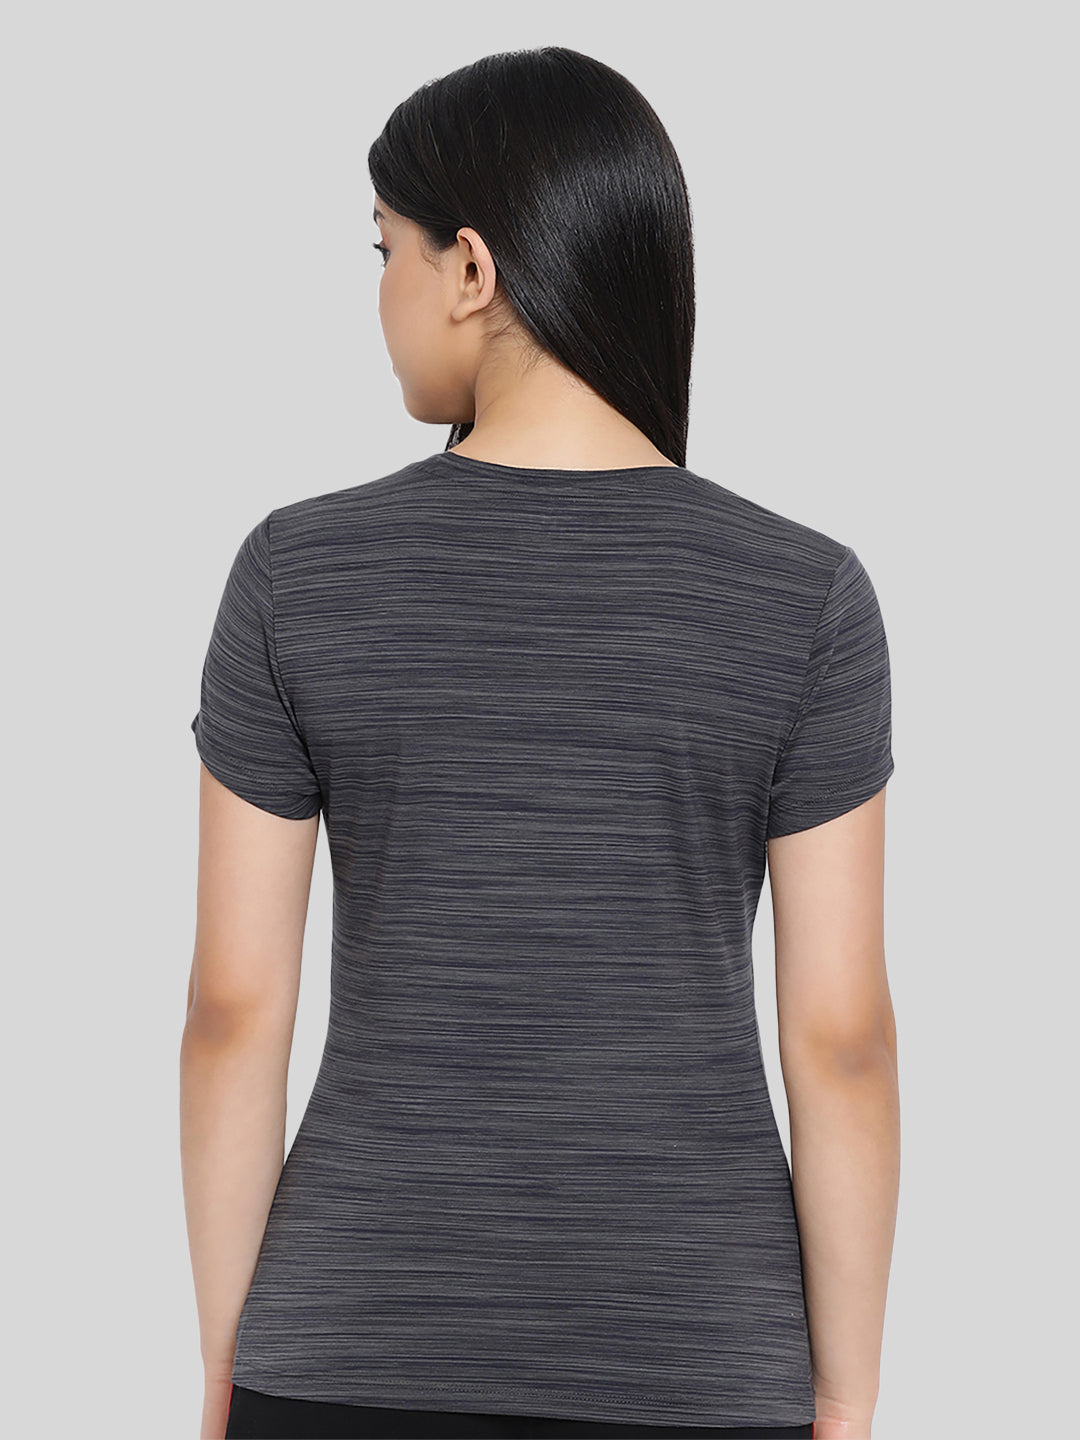 Black Round Neck Space Dyeing T-Shirt #413